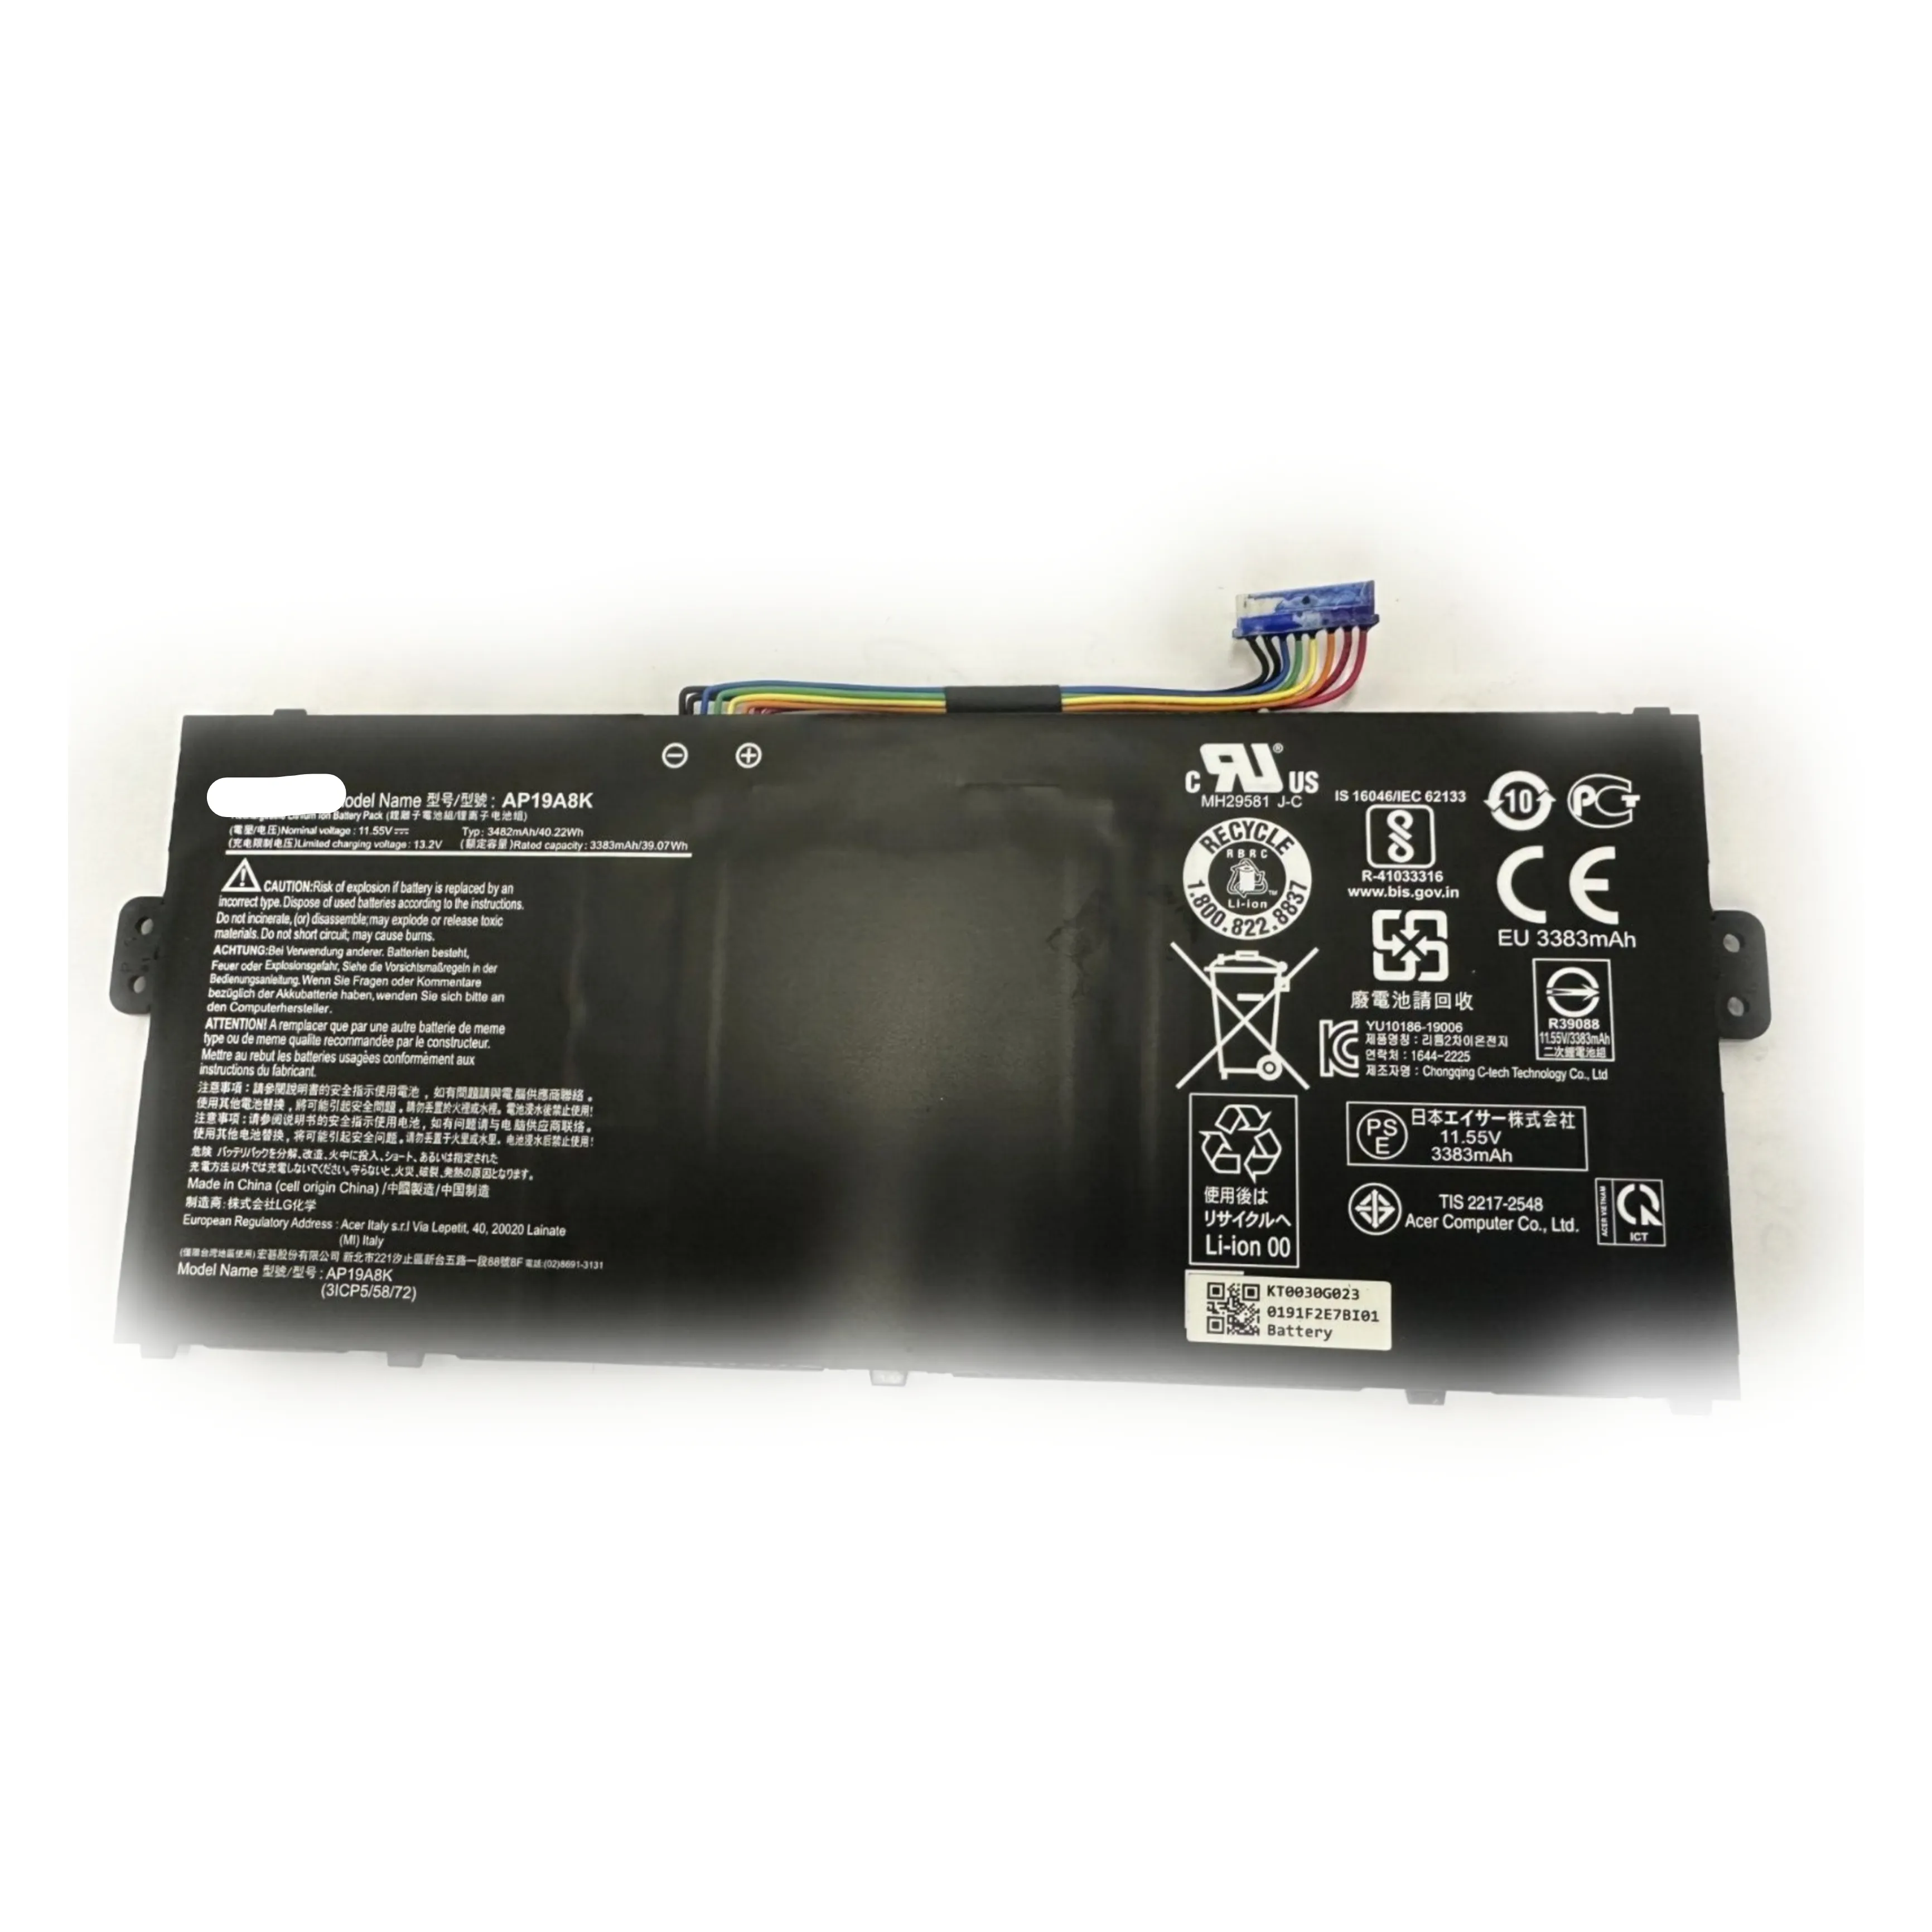 Replacement laptop battery cell for Acer Chromebook KT.0030G.023 AP19A8K Laptop Battery 3-Cell